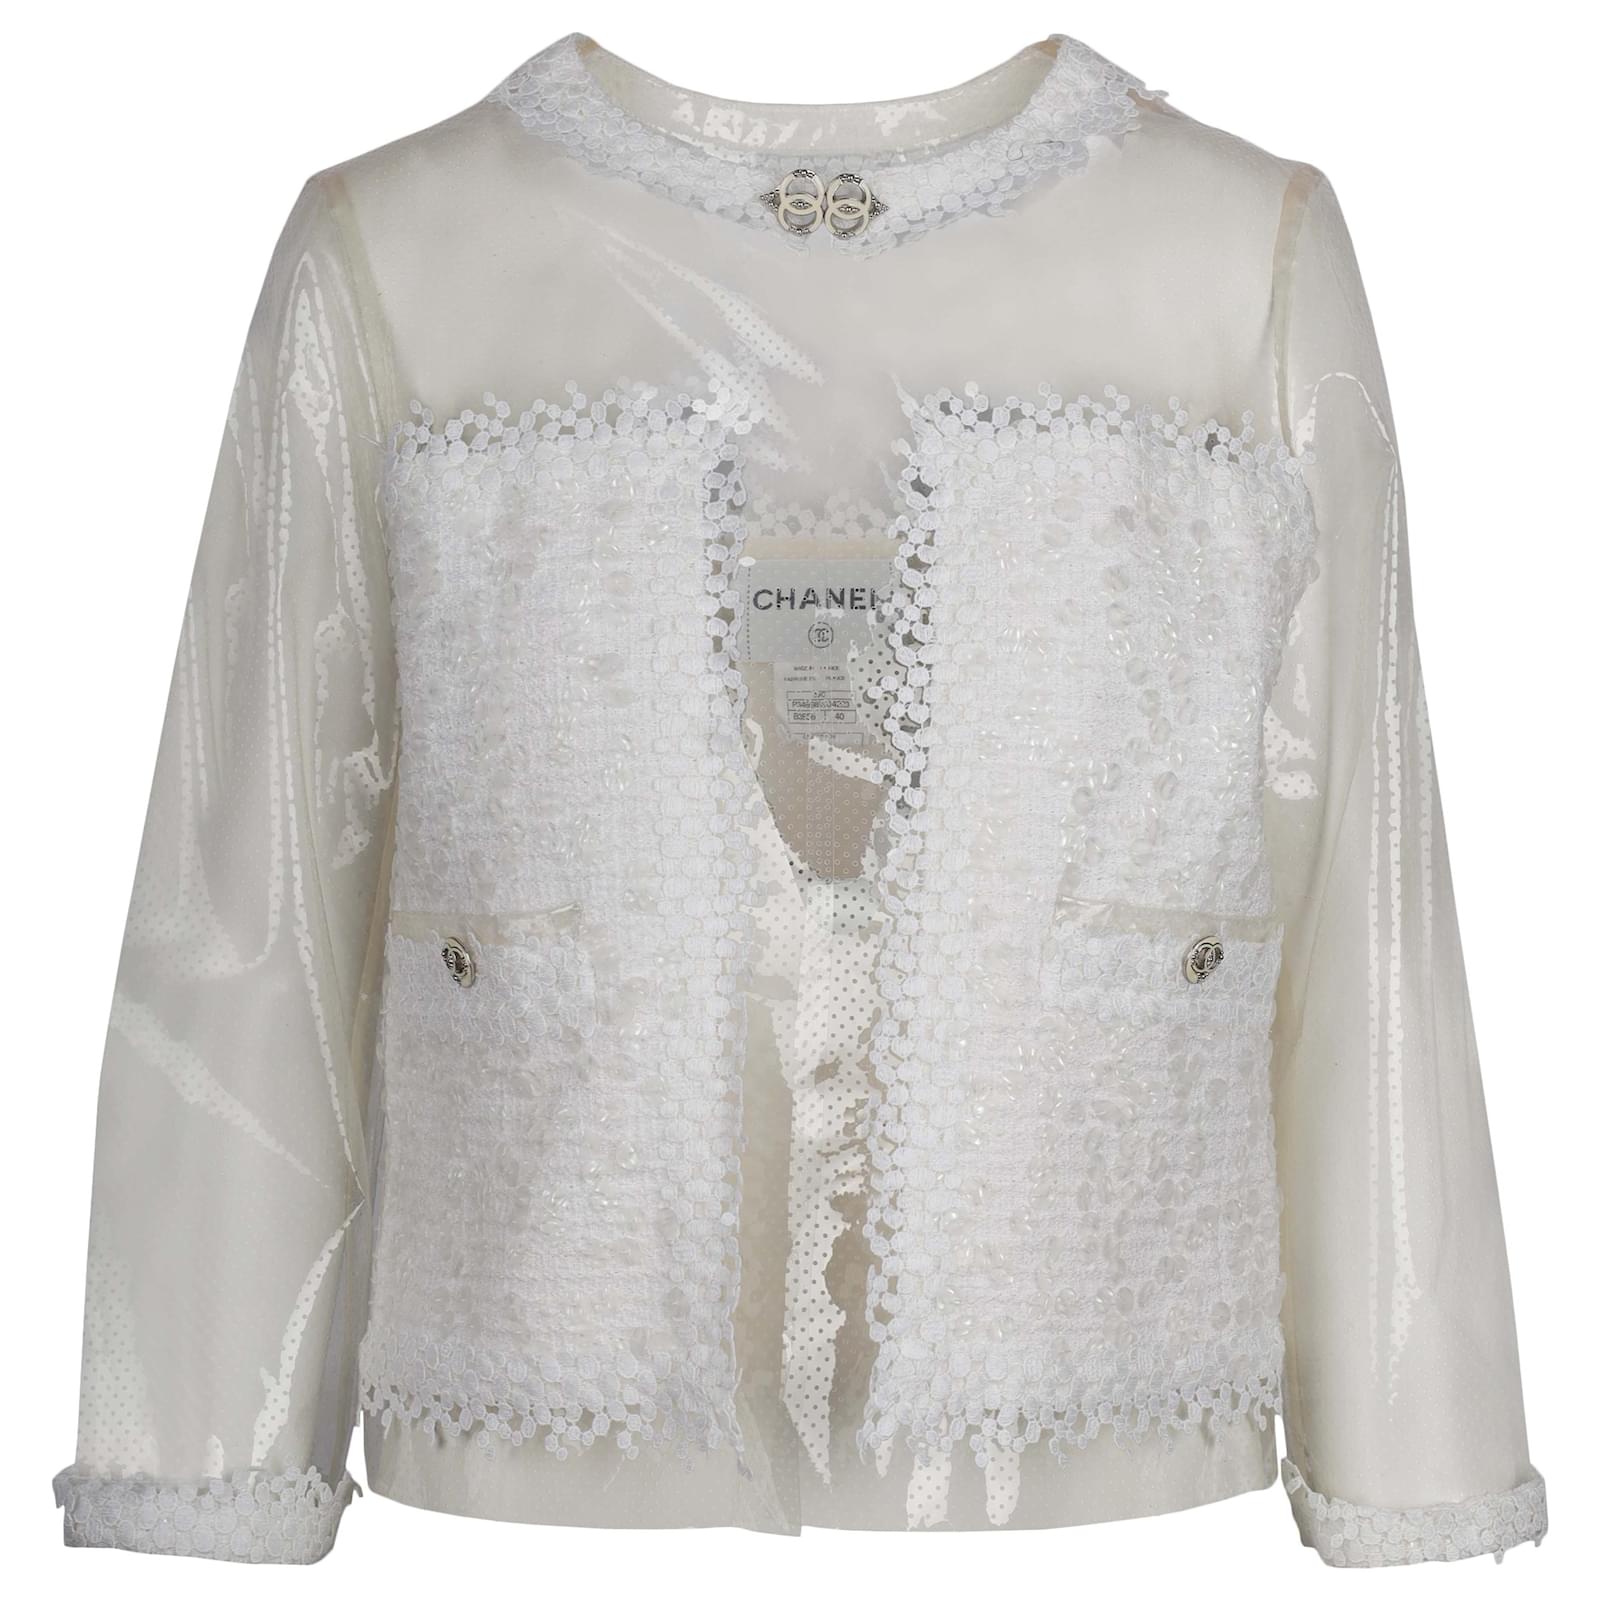 Jackets Chanel Chanel Clear Jacket with White Lace Embroidery